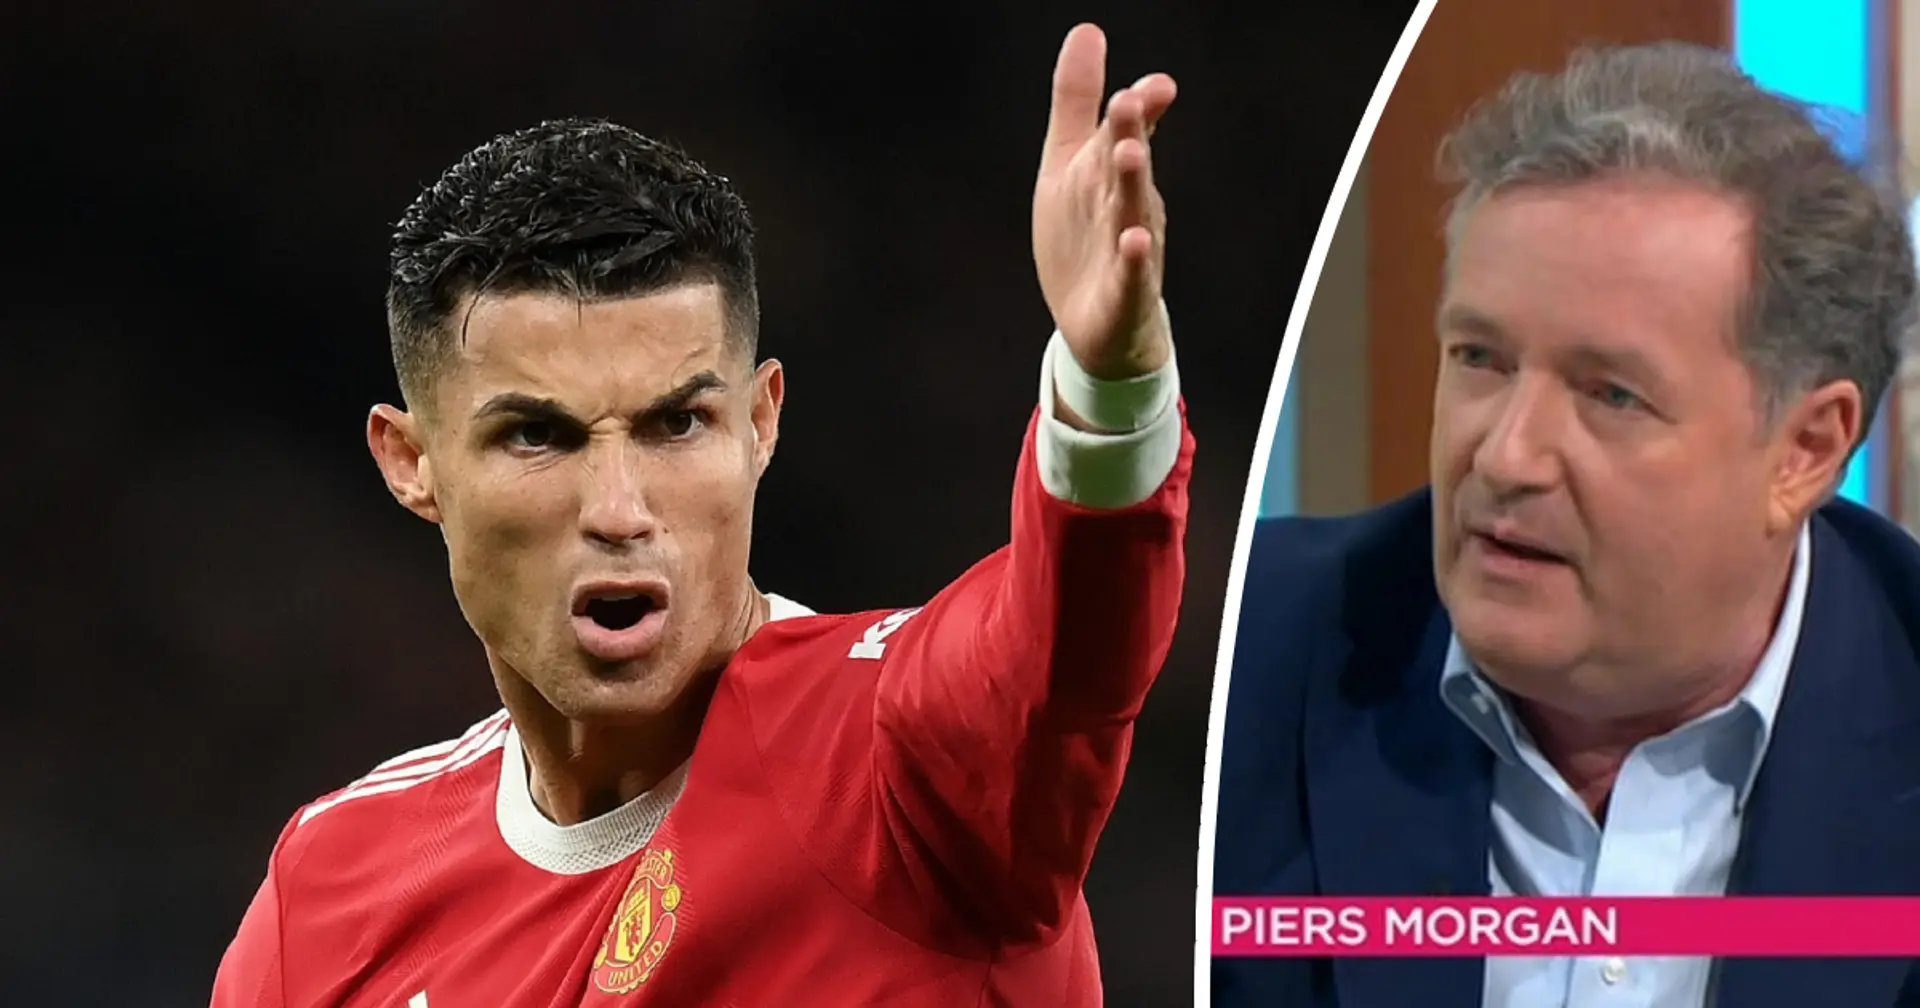 Piers Morgan: 'Ronaldo is absolutely sick and tired of having to carry United'